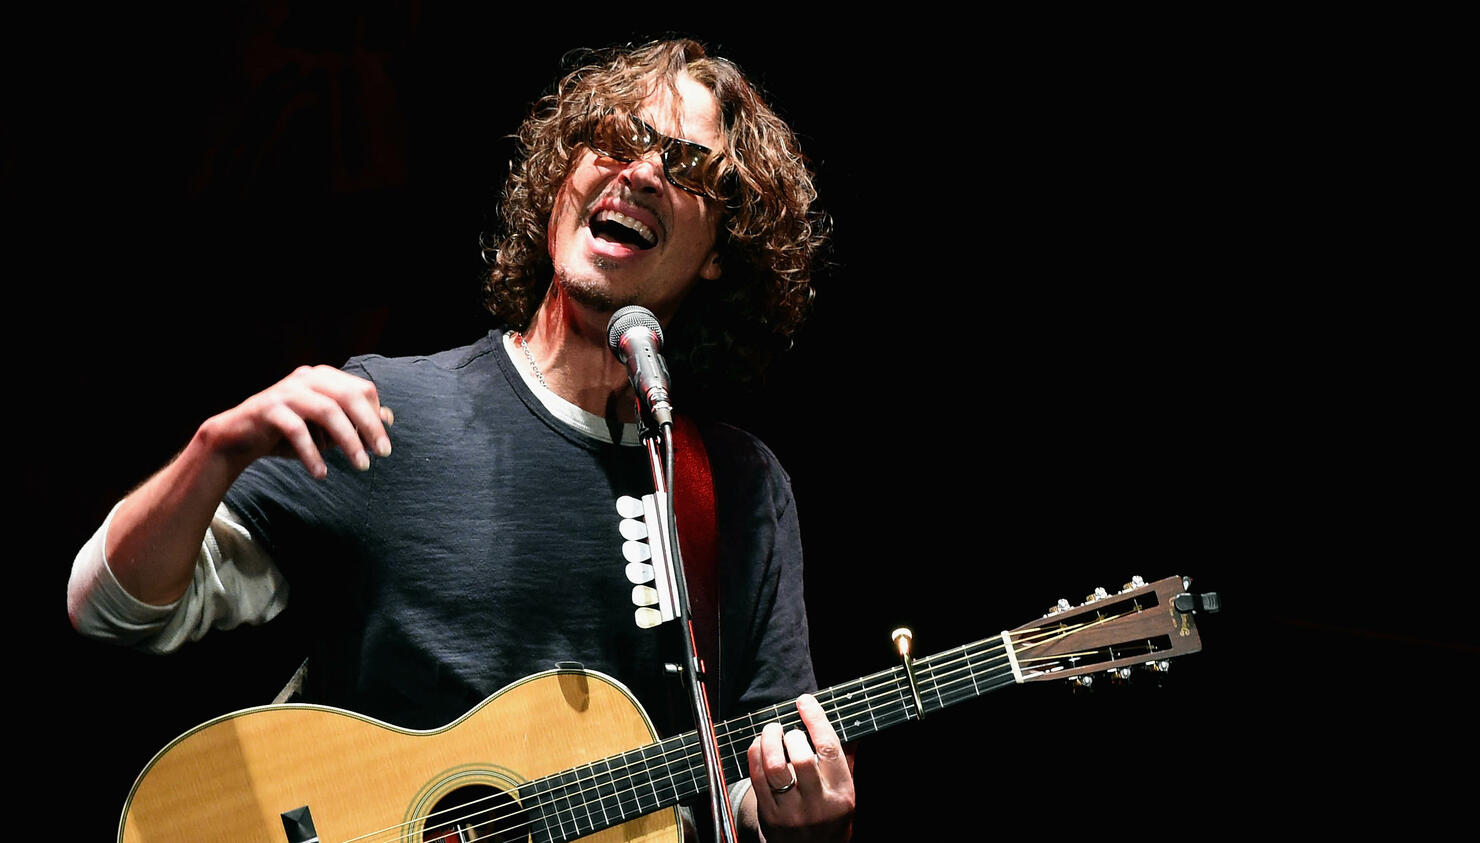 Hear Chris Cornell's Mashup of "One" by U2 and Metallica